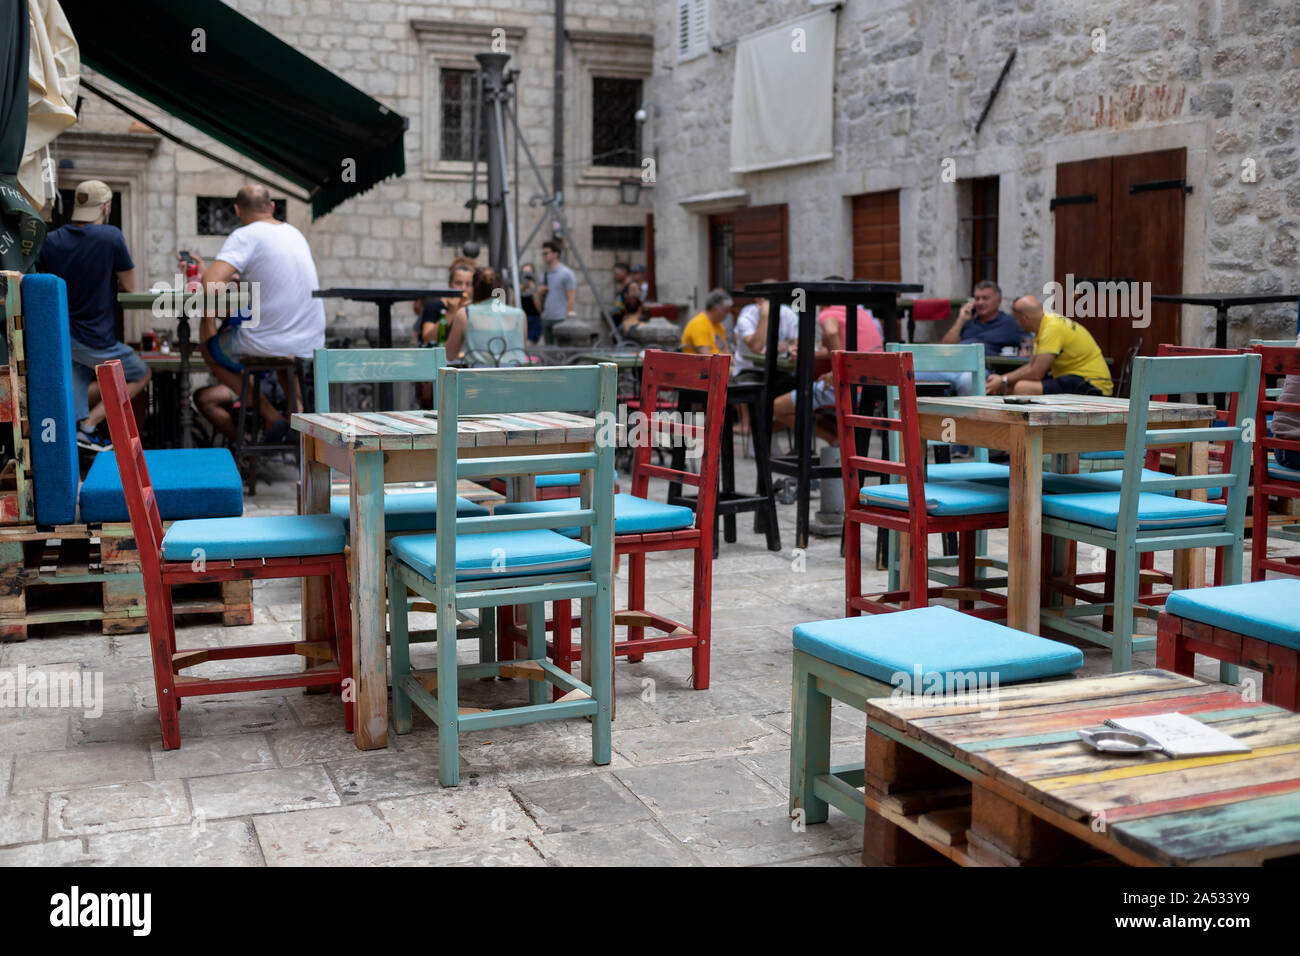 Montenegro, Sep 17, 2019: Urban scene with guests sitting at an outdoor cafe in the Old Town of Kotor Stock Photo